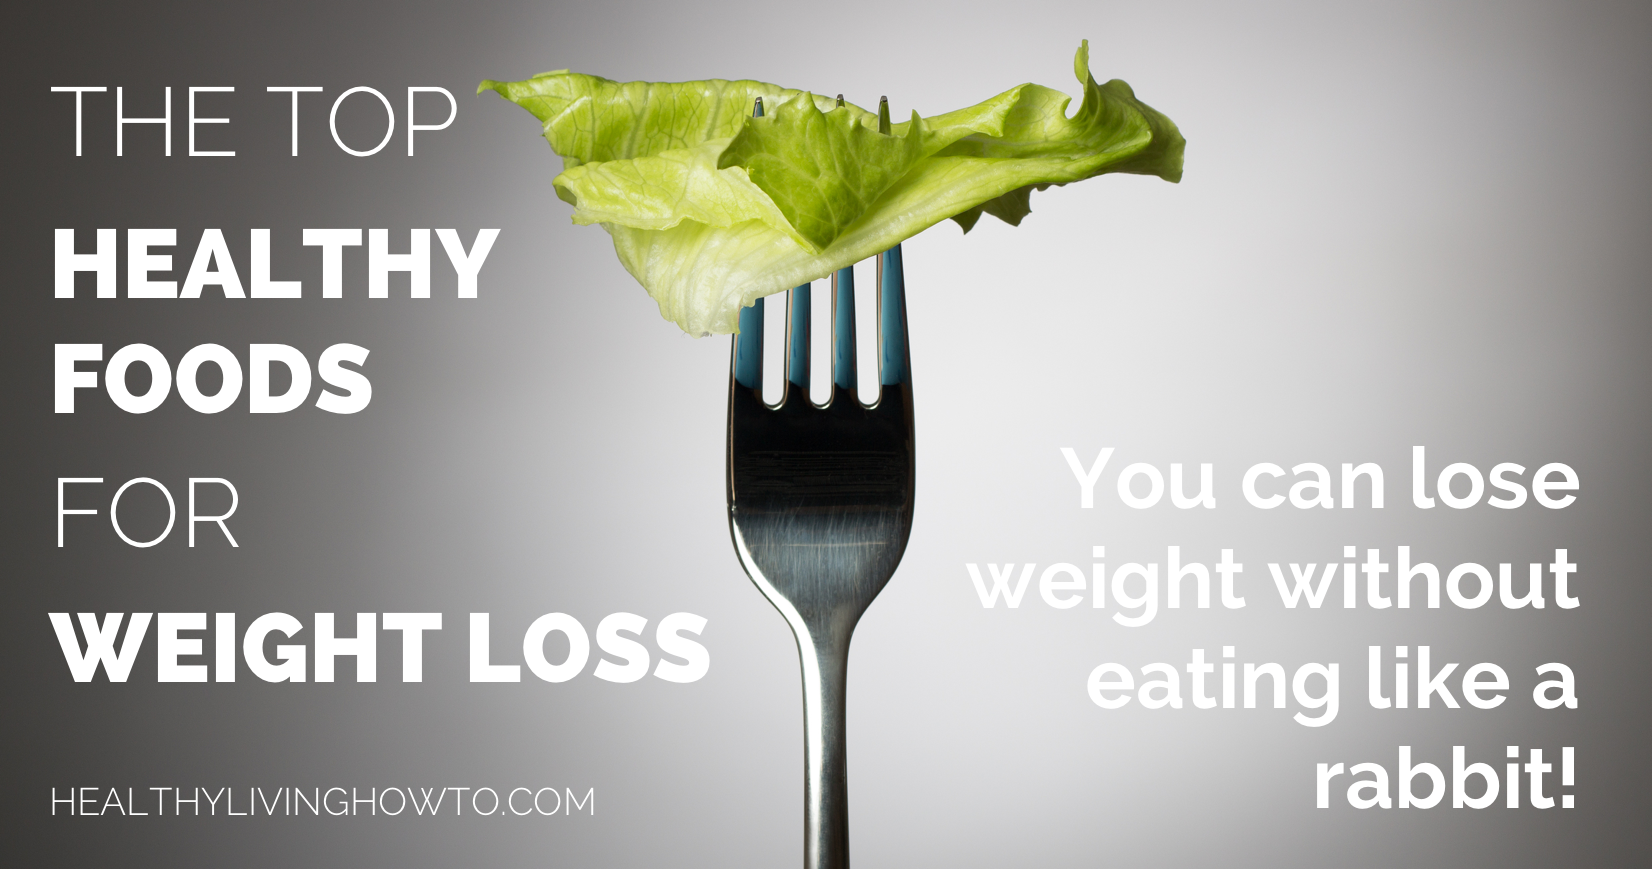 The Top Healthy Foods For Weight Loss | healthylivinghowto.com